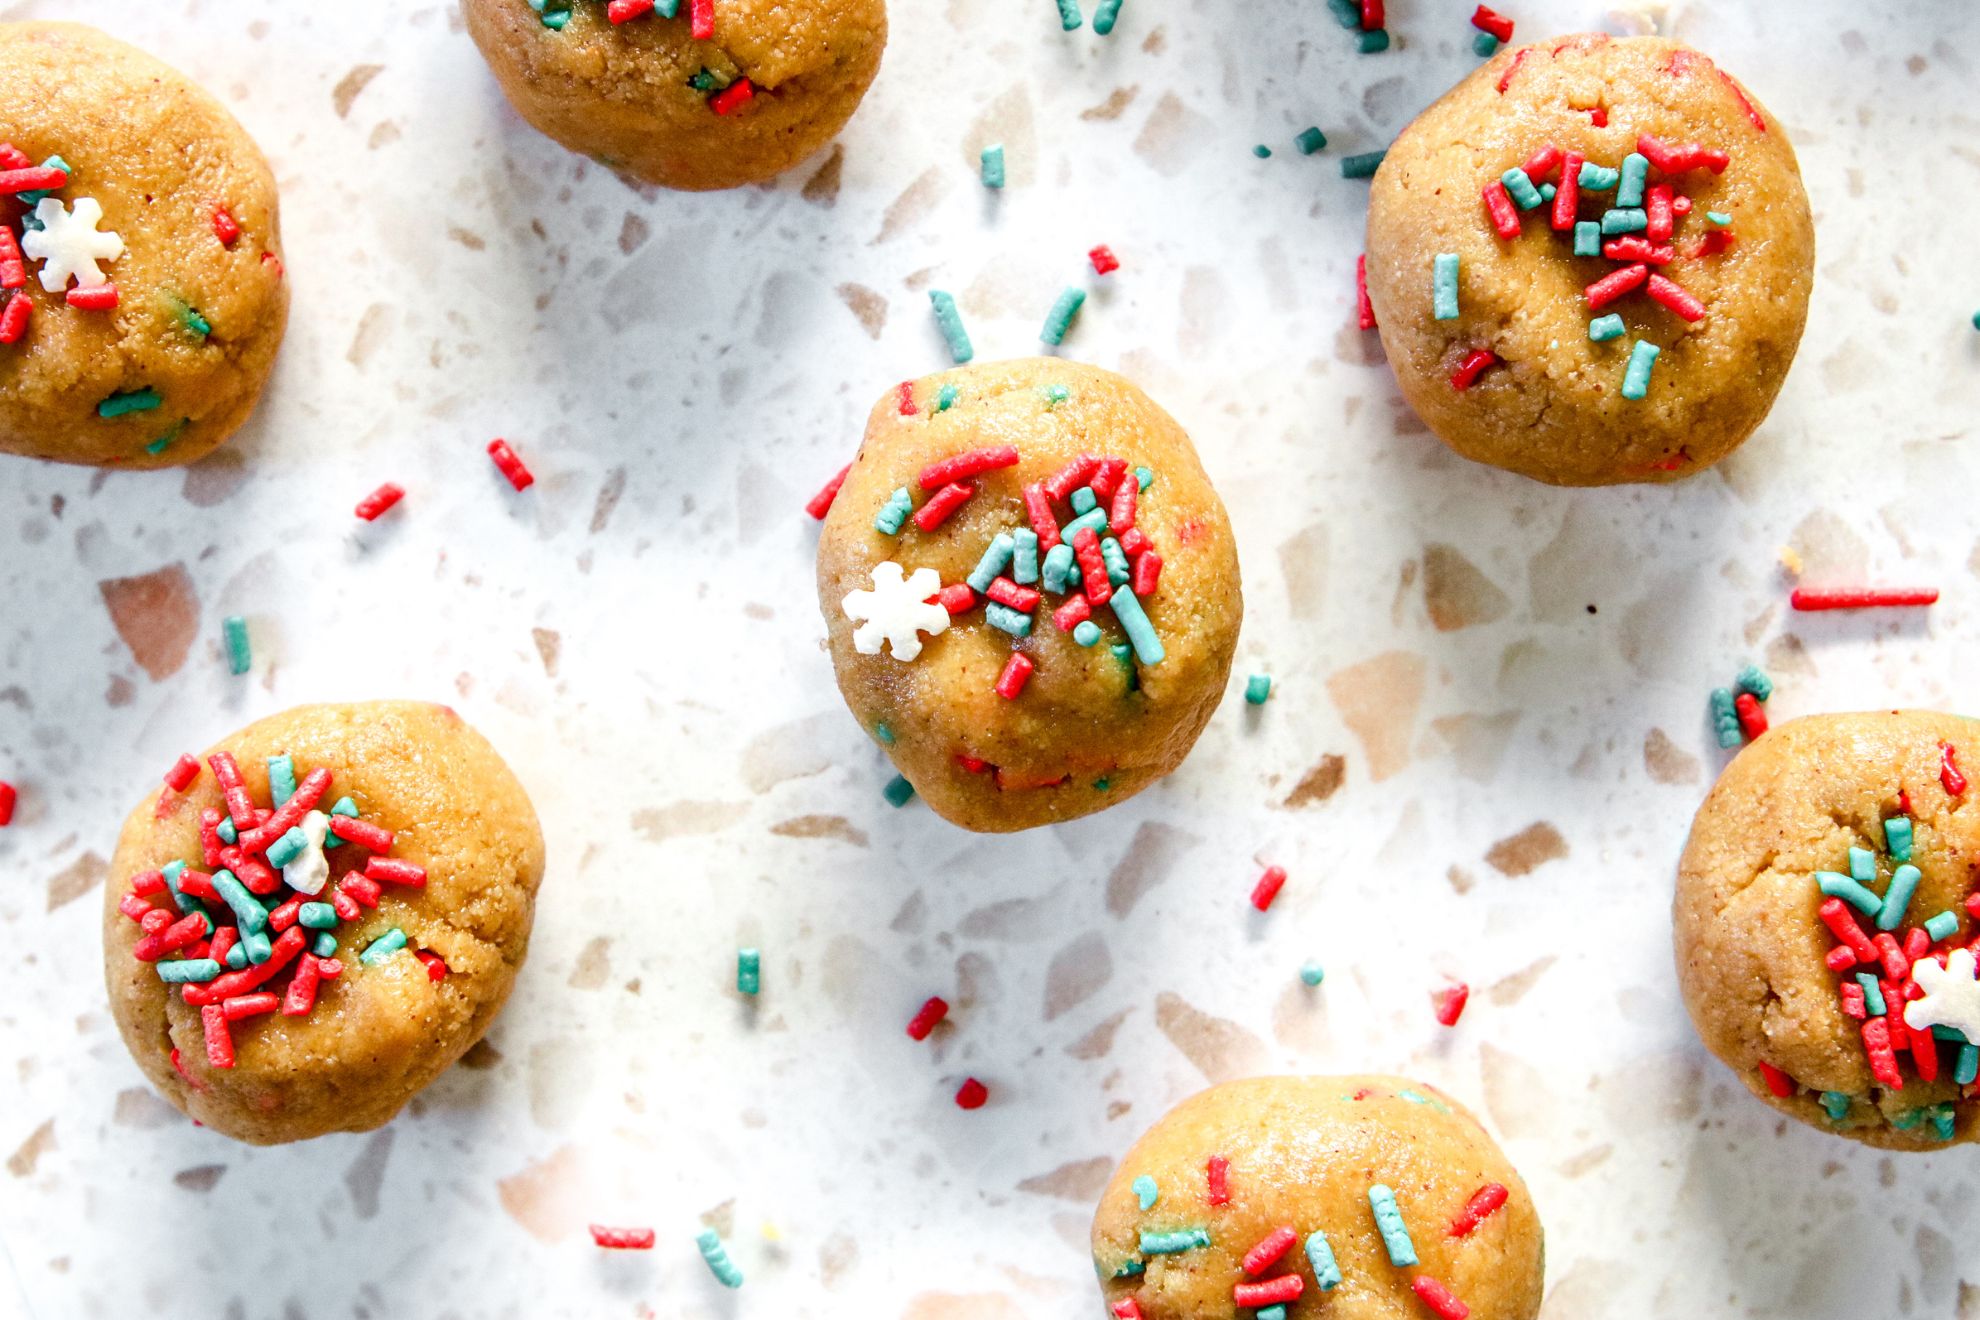 This is an overhead horizontal image of cookie dough balls on a white terrazzo surface. The balls have red green and snowflake sprinkles on top.